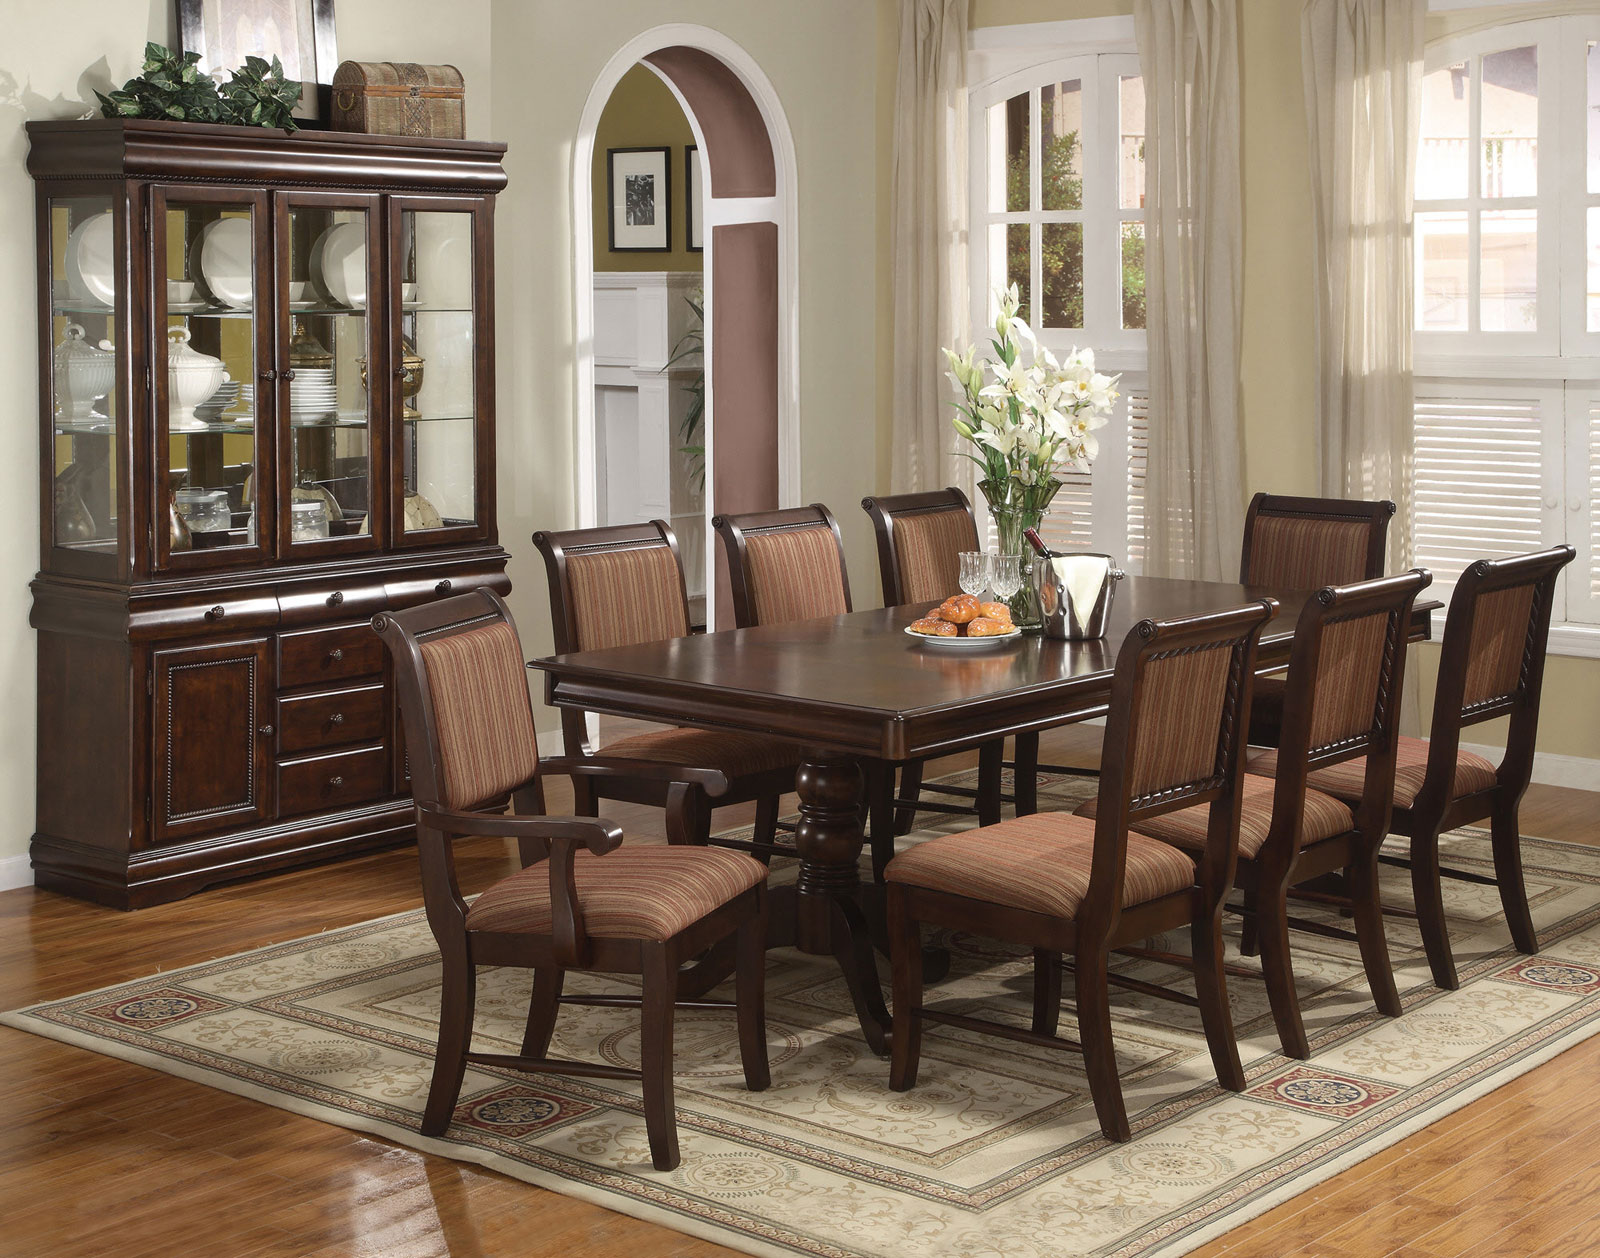 Wooden Furnitures Brown Dazzling Wooden Furniture In Dark Brown Color Of Contemporary Dining Room Sets With Table And Chairs On Rug Completed With Vase Table Decoration Dining Room The Design Contemporary Dining Room Sets